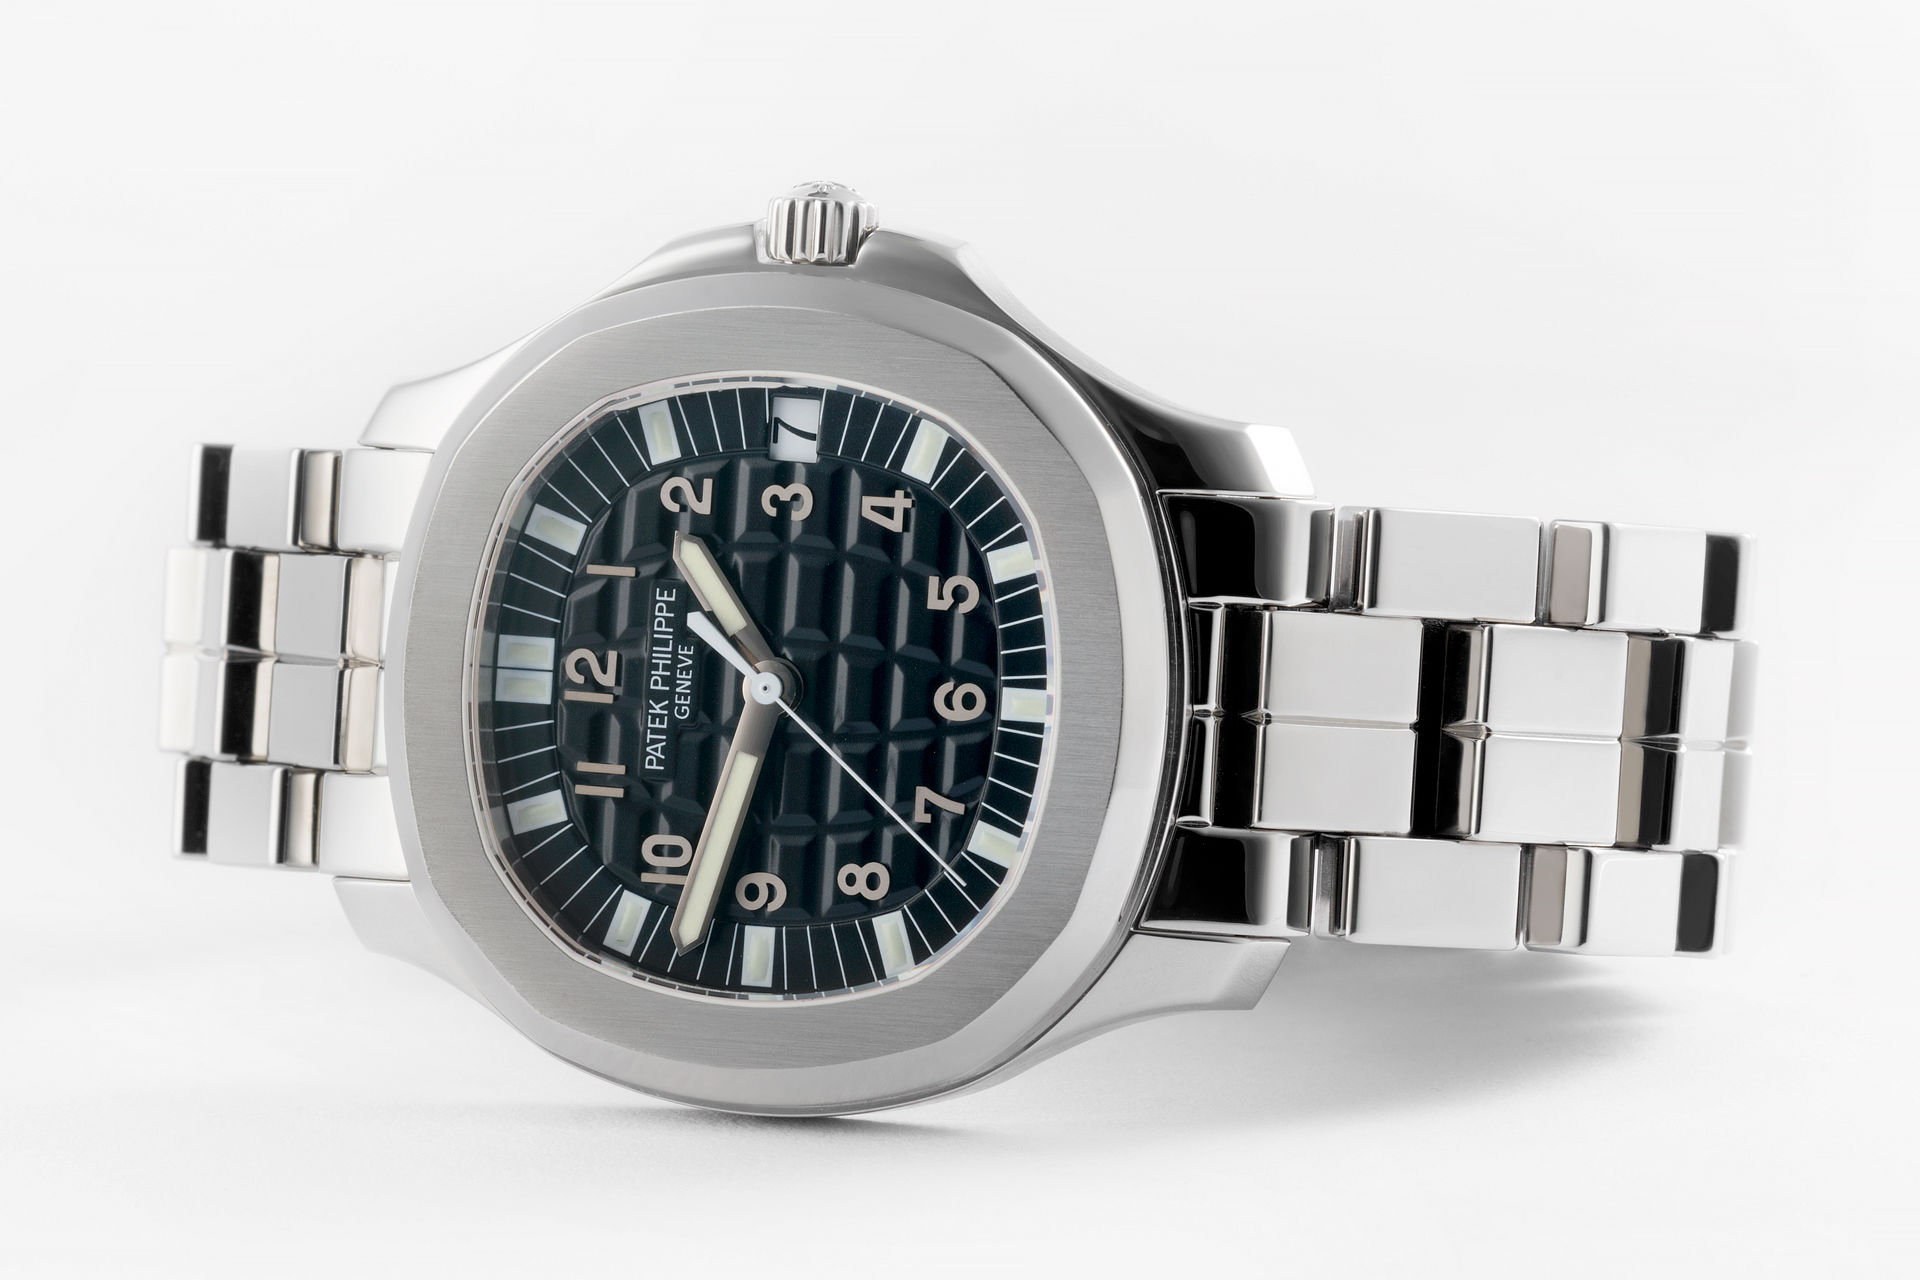 ref 5065A-001 | 37mm Box and Papers | Patek Philippe Aquanaut